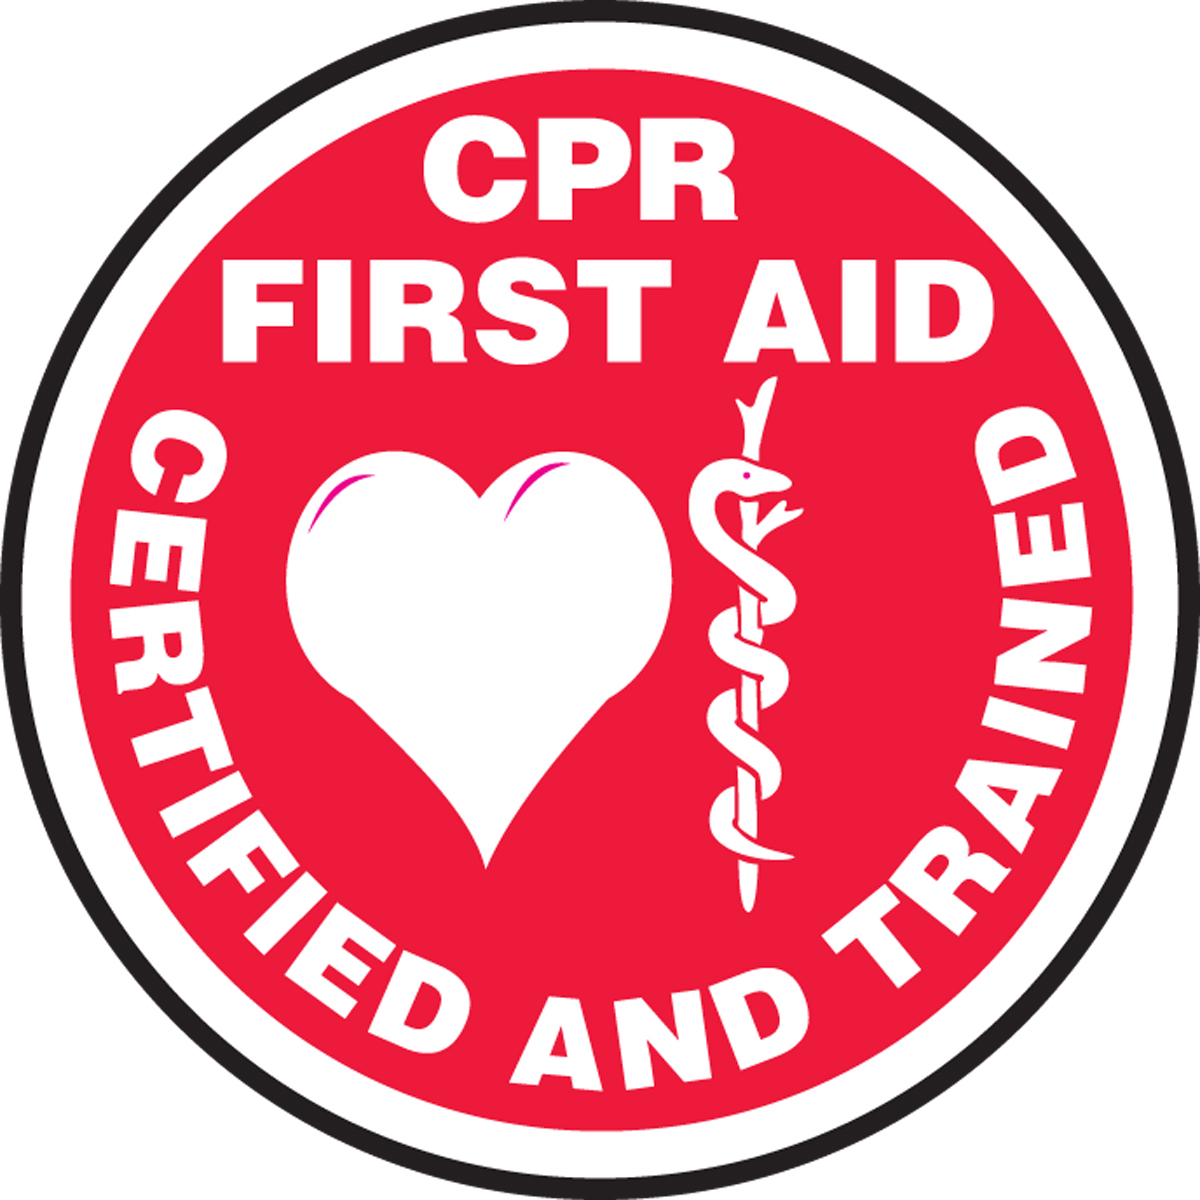 CPR FIRST AID CERTIFIED AND TRAINED